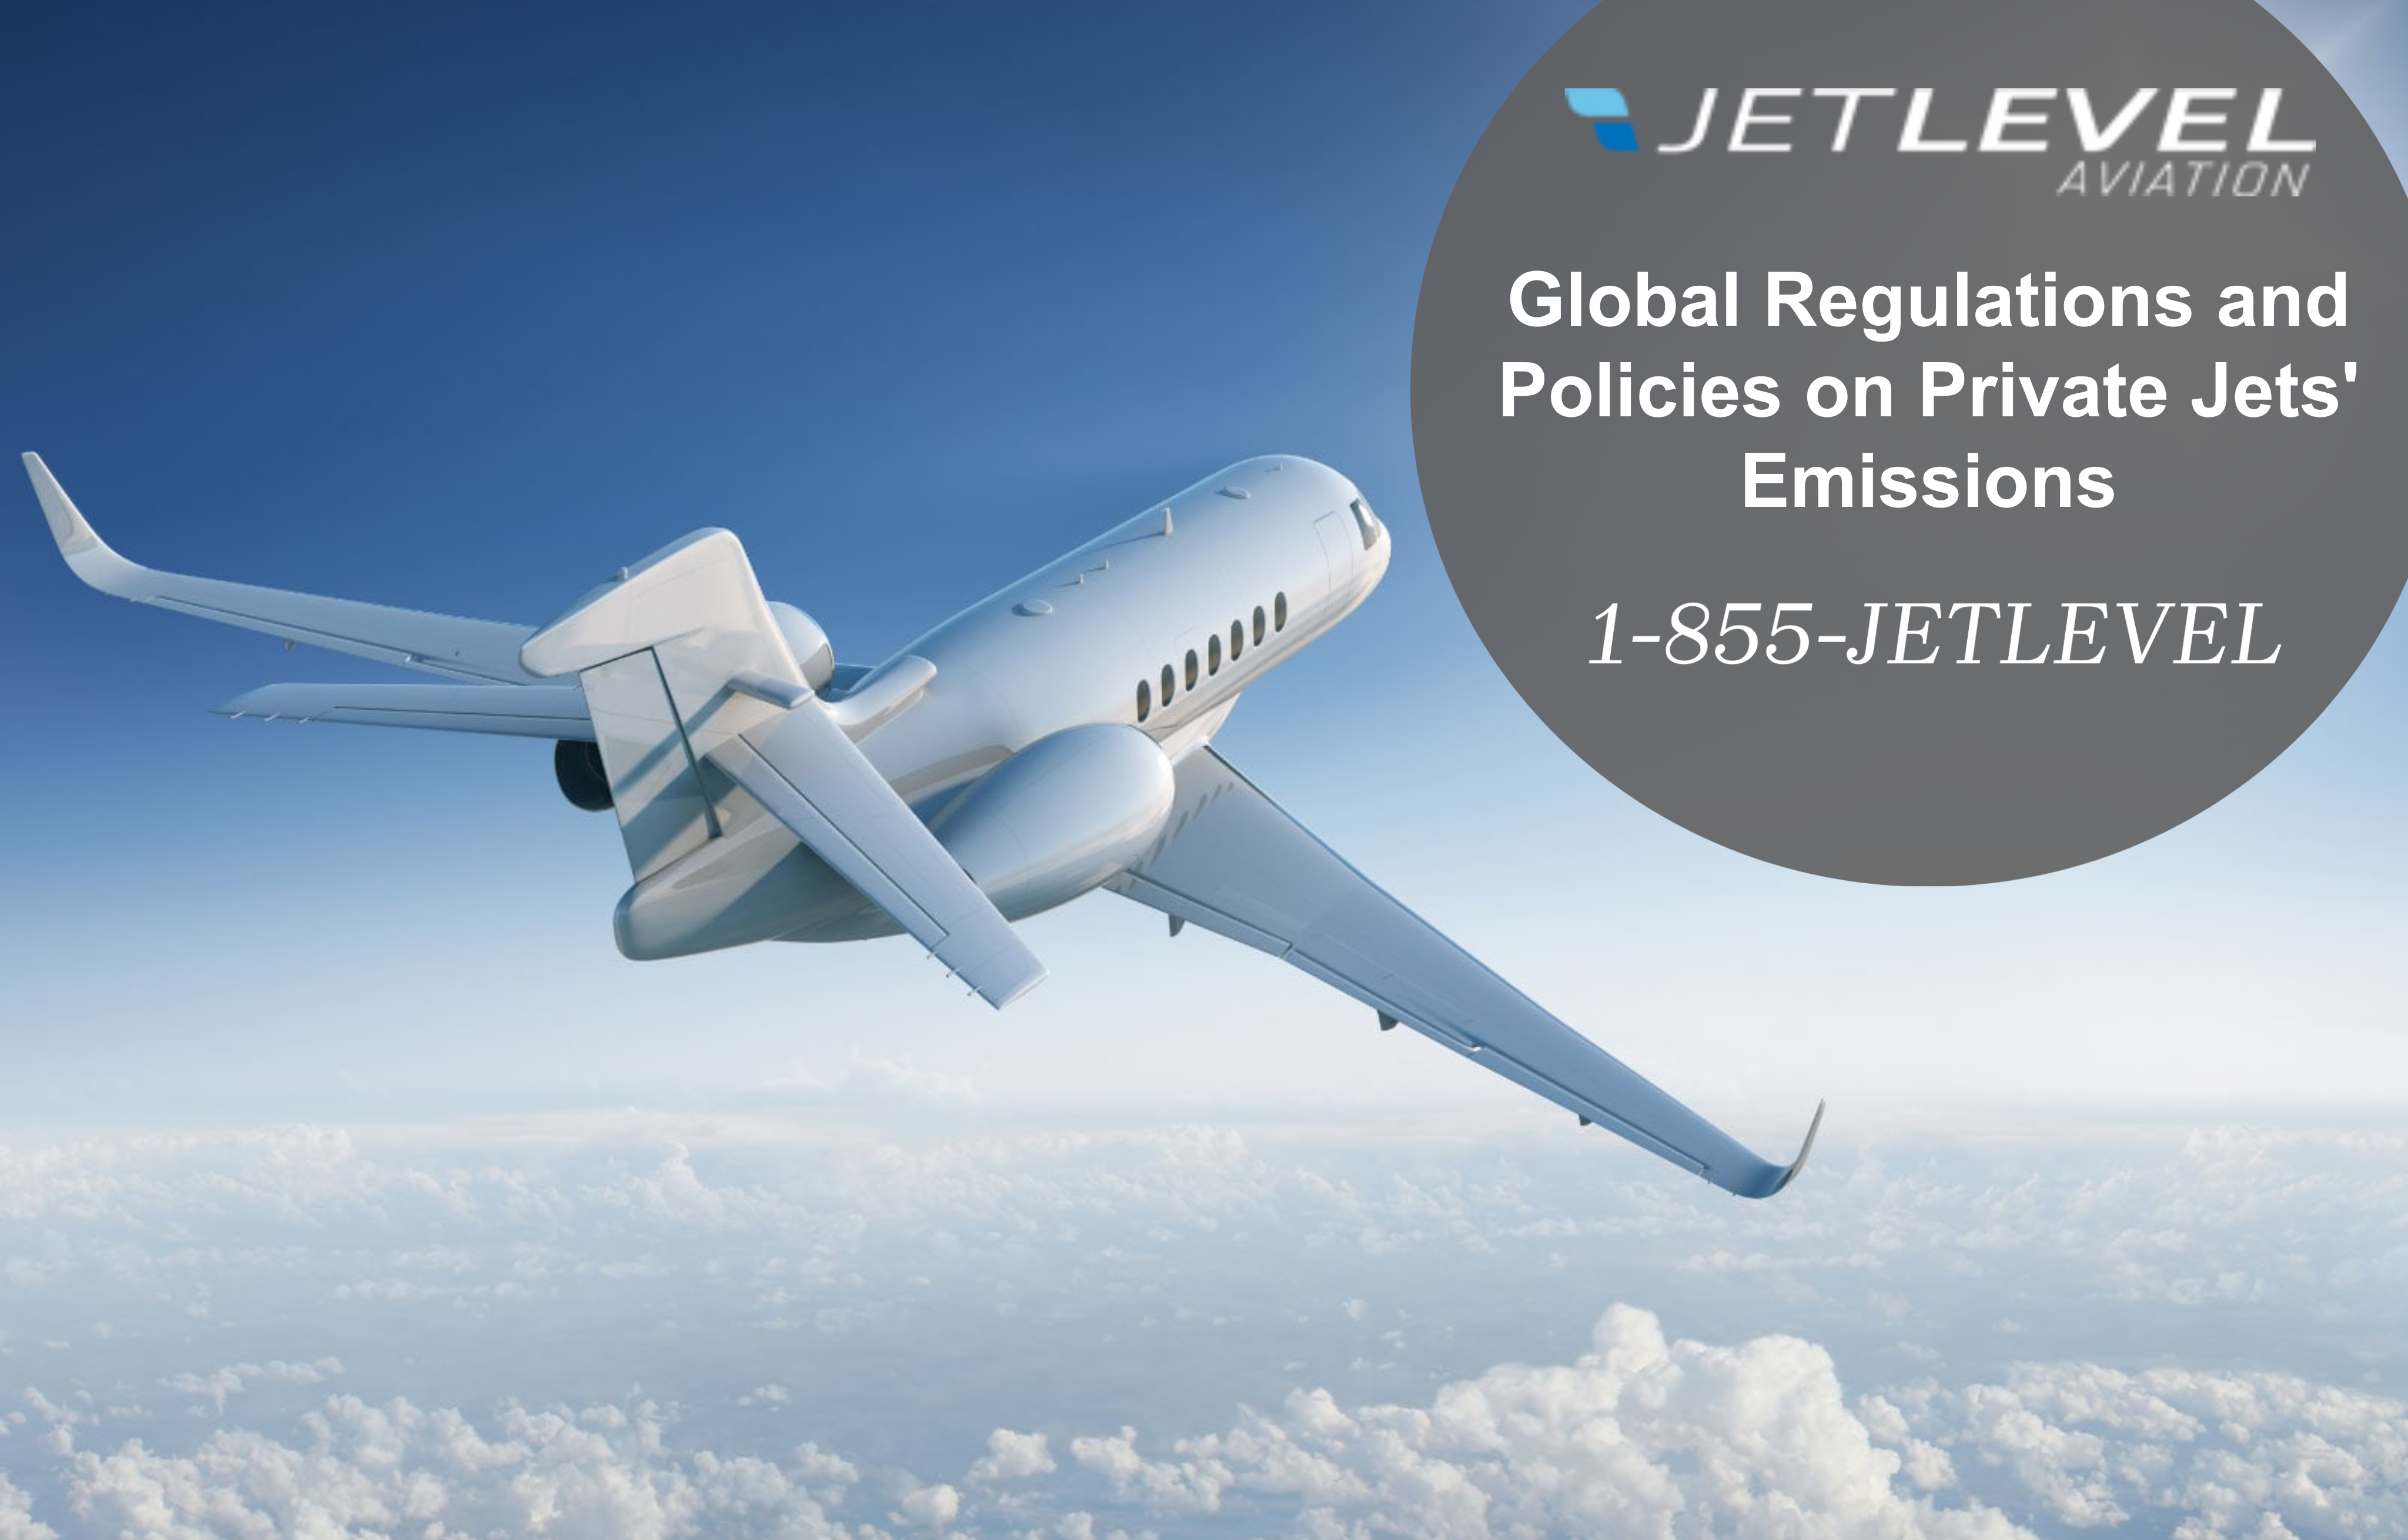 Global Regulations and Policies on Private Jets' Emissions